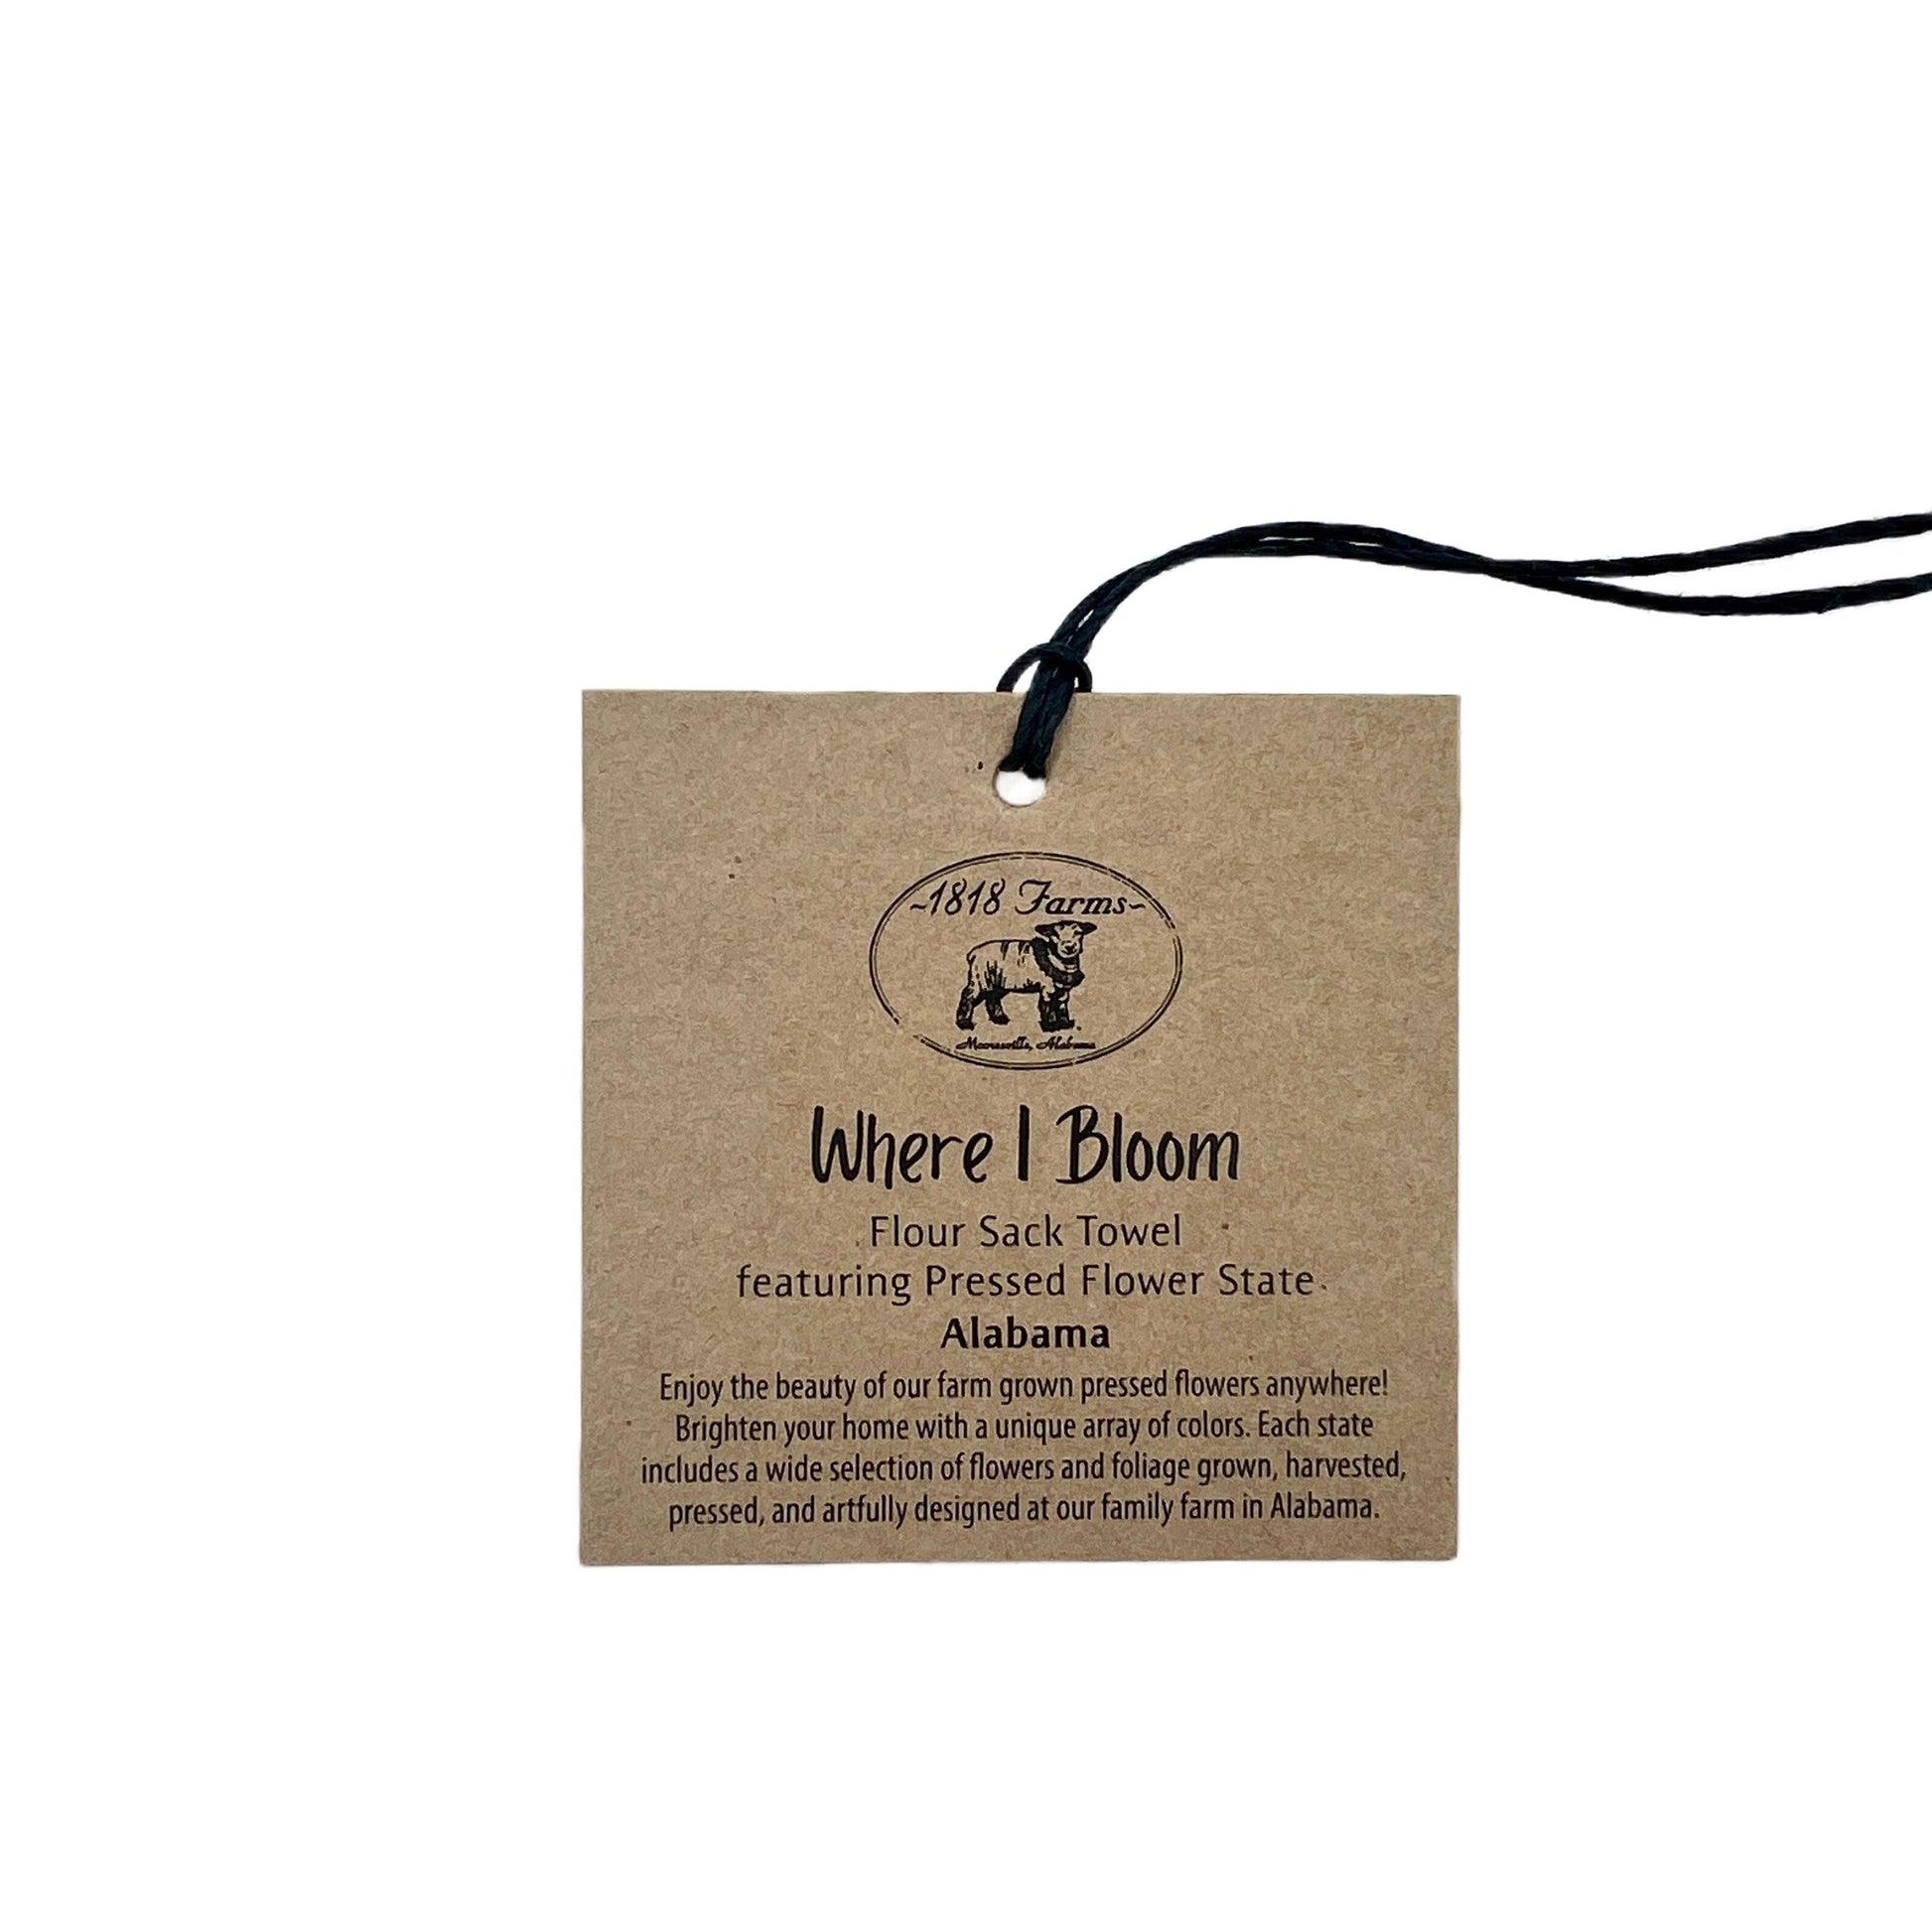 Indiana Themed Flour Sack Towel  - "Where I Bloom" Collection Towel 1818 Farms   